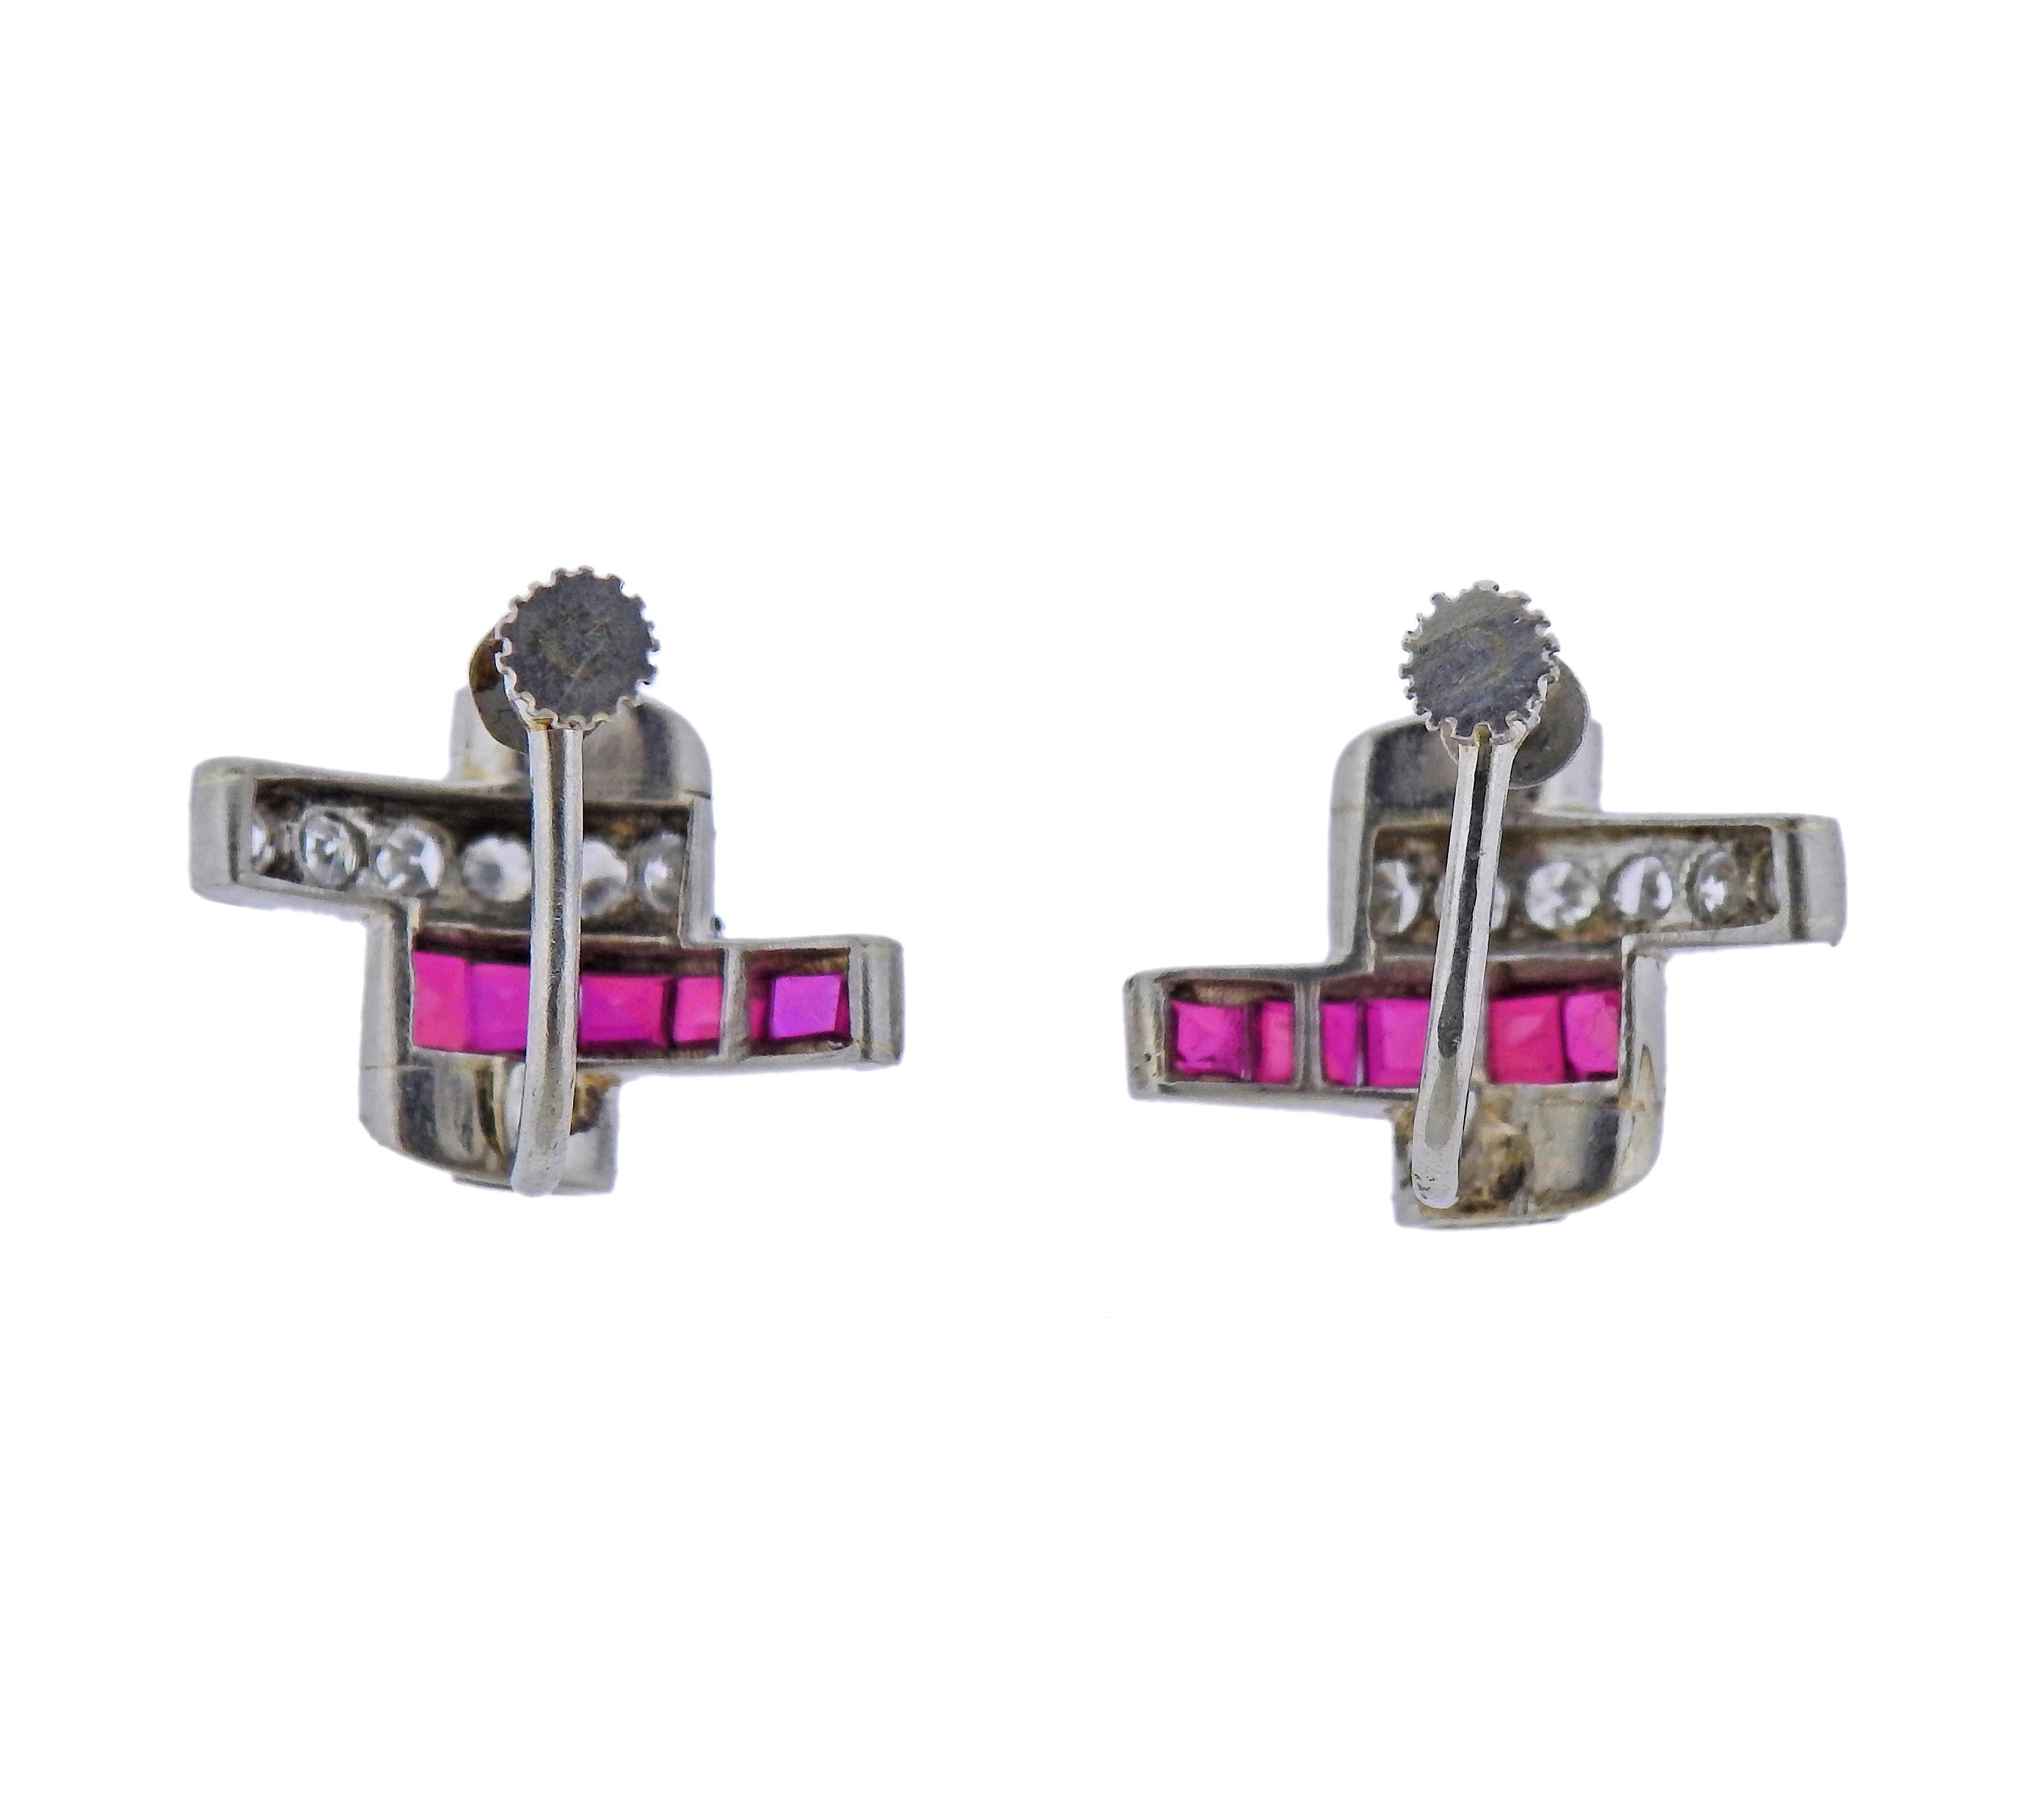 Pair of Mid Century platinum earrings with rubies and approx. 0.80ctw in diamonds. Earrings are 13mm x 20mm. Weight - 7.9 grams. 